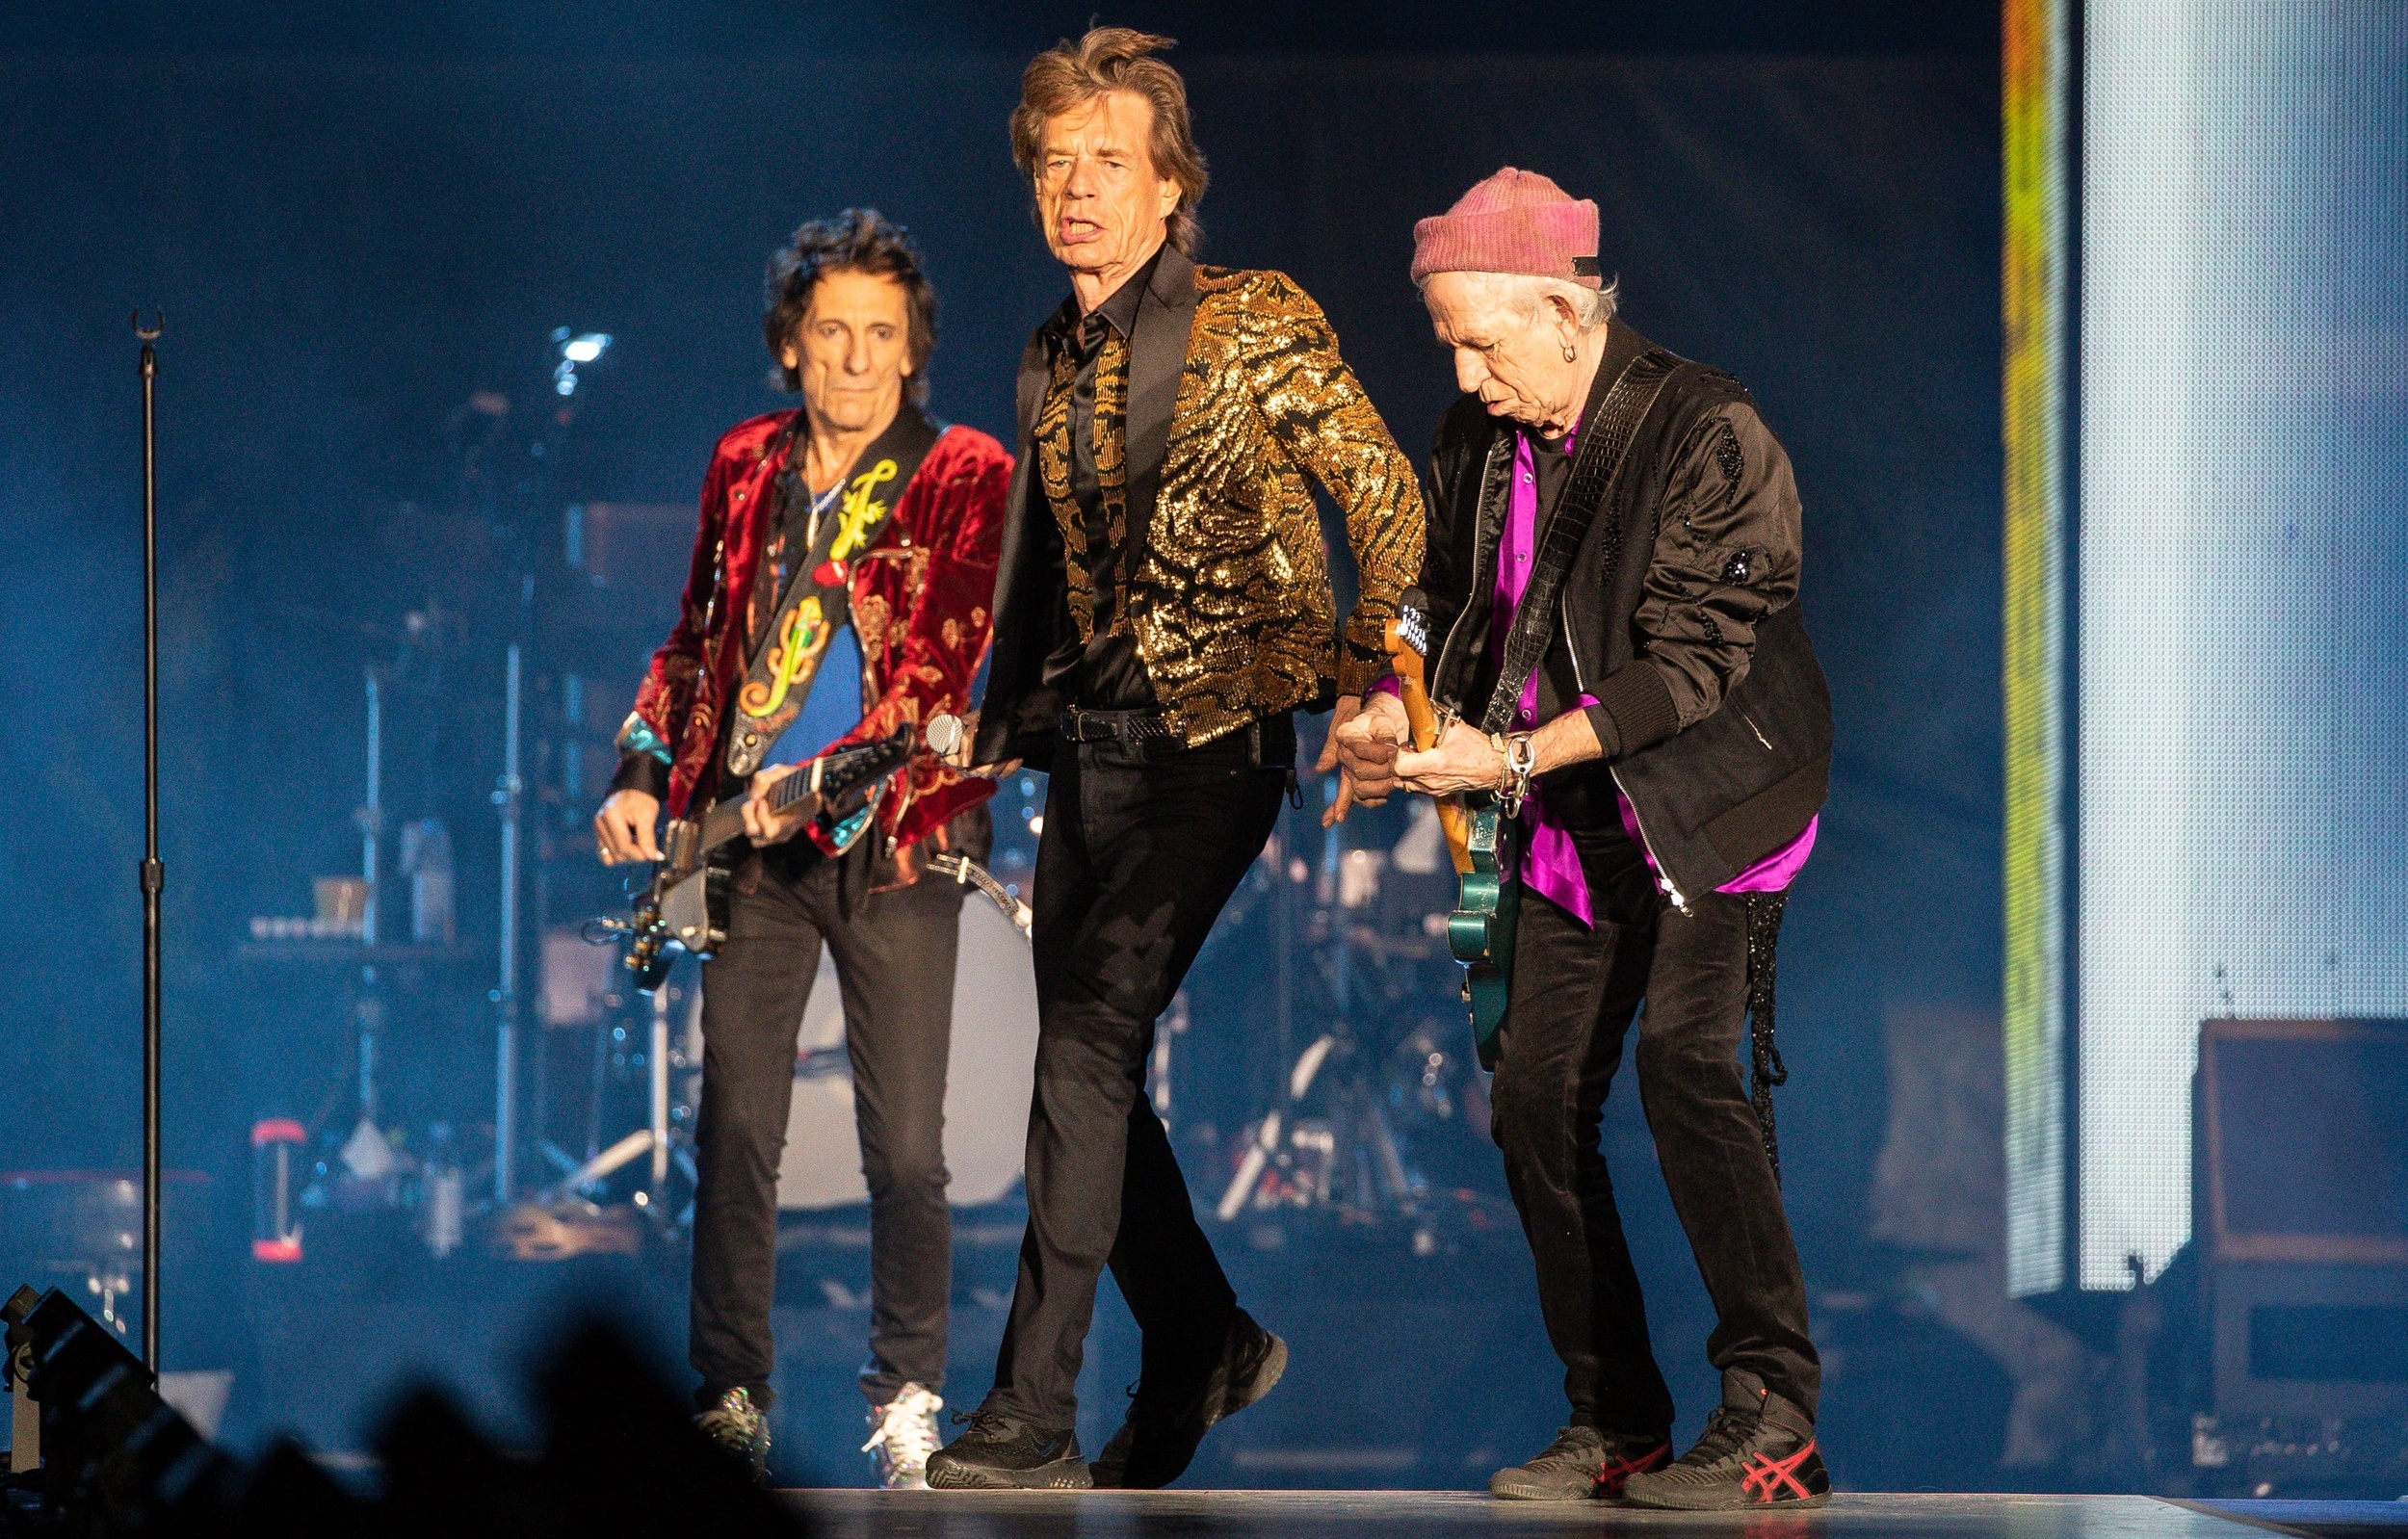 <p>Mick and Keith are both 80 years old and Ronnie Wood is 76, but the trio that currently makes up the Rolling Stones official lineup is scheduled to play 19 shows (in 16 scheduled cities) this year from late April to mid-July of this year. And we expect the energy level to be on high. While the band will play numbers from 2023's <em>Hackney Diamonds</em>, including the Grammy Award-nominated "<a href="https://www.youtube.com/watch?v=_mEC54eTuGw">Angry</a>," we know fans will hear plenty of those legendary classics such as "(I Can't Get No) Satisfaction" and "Jumpin' Jack Flash."</p><p>You may also like: <a href='https://www.yardbarker.com/entertainment/articles/the_25_most_patriotic_films_of_all_time_022724/s1__27715982'>The 25 most patriotic films of all time</a></p>